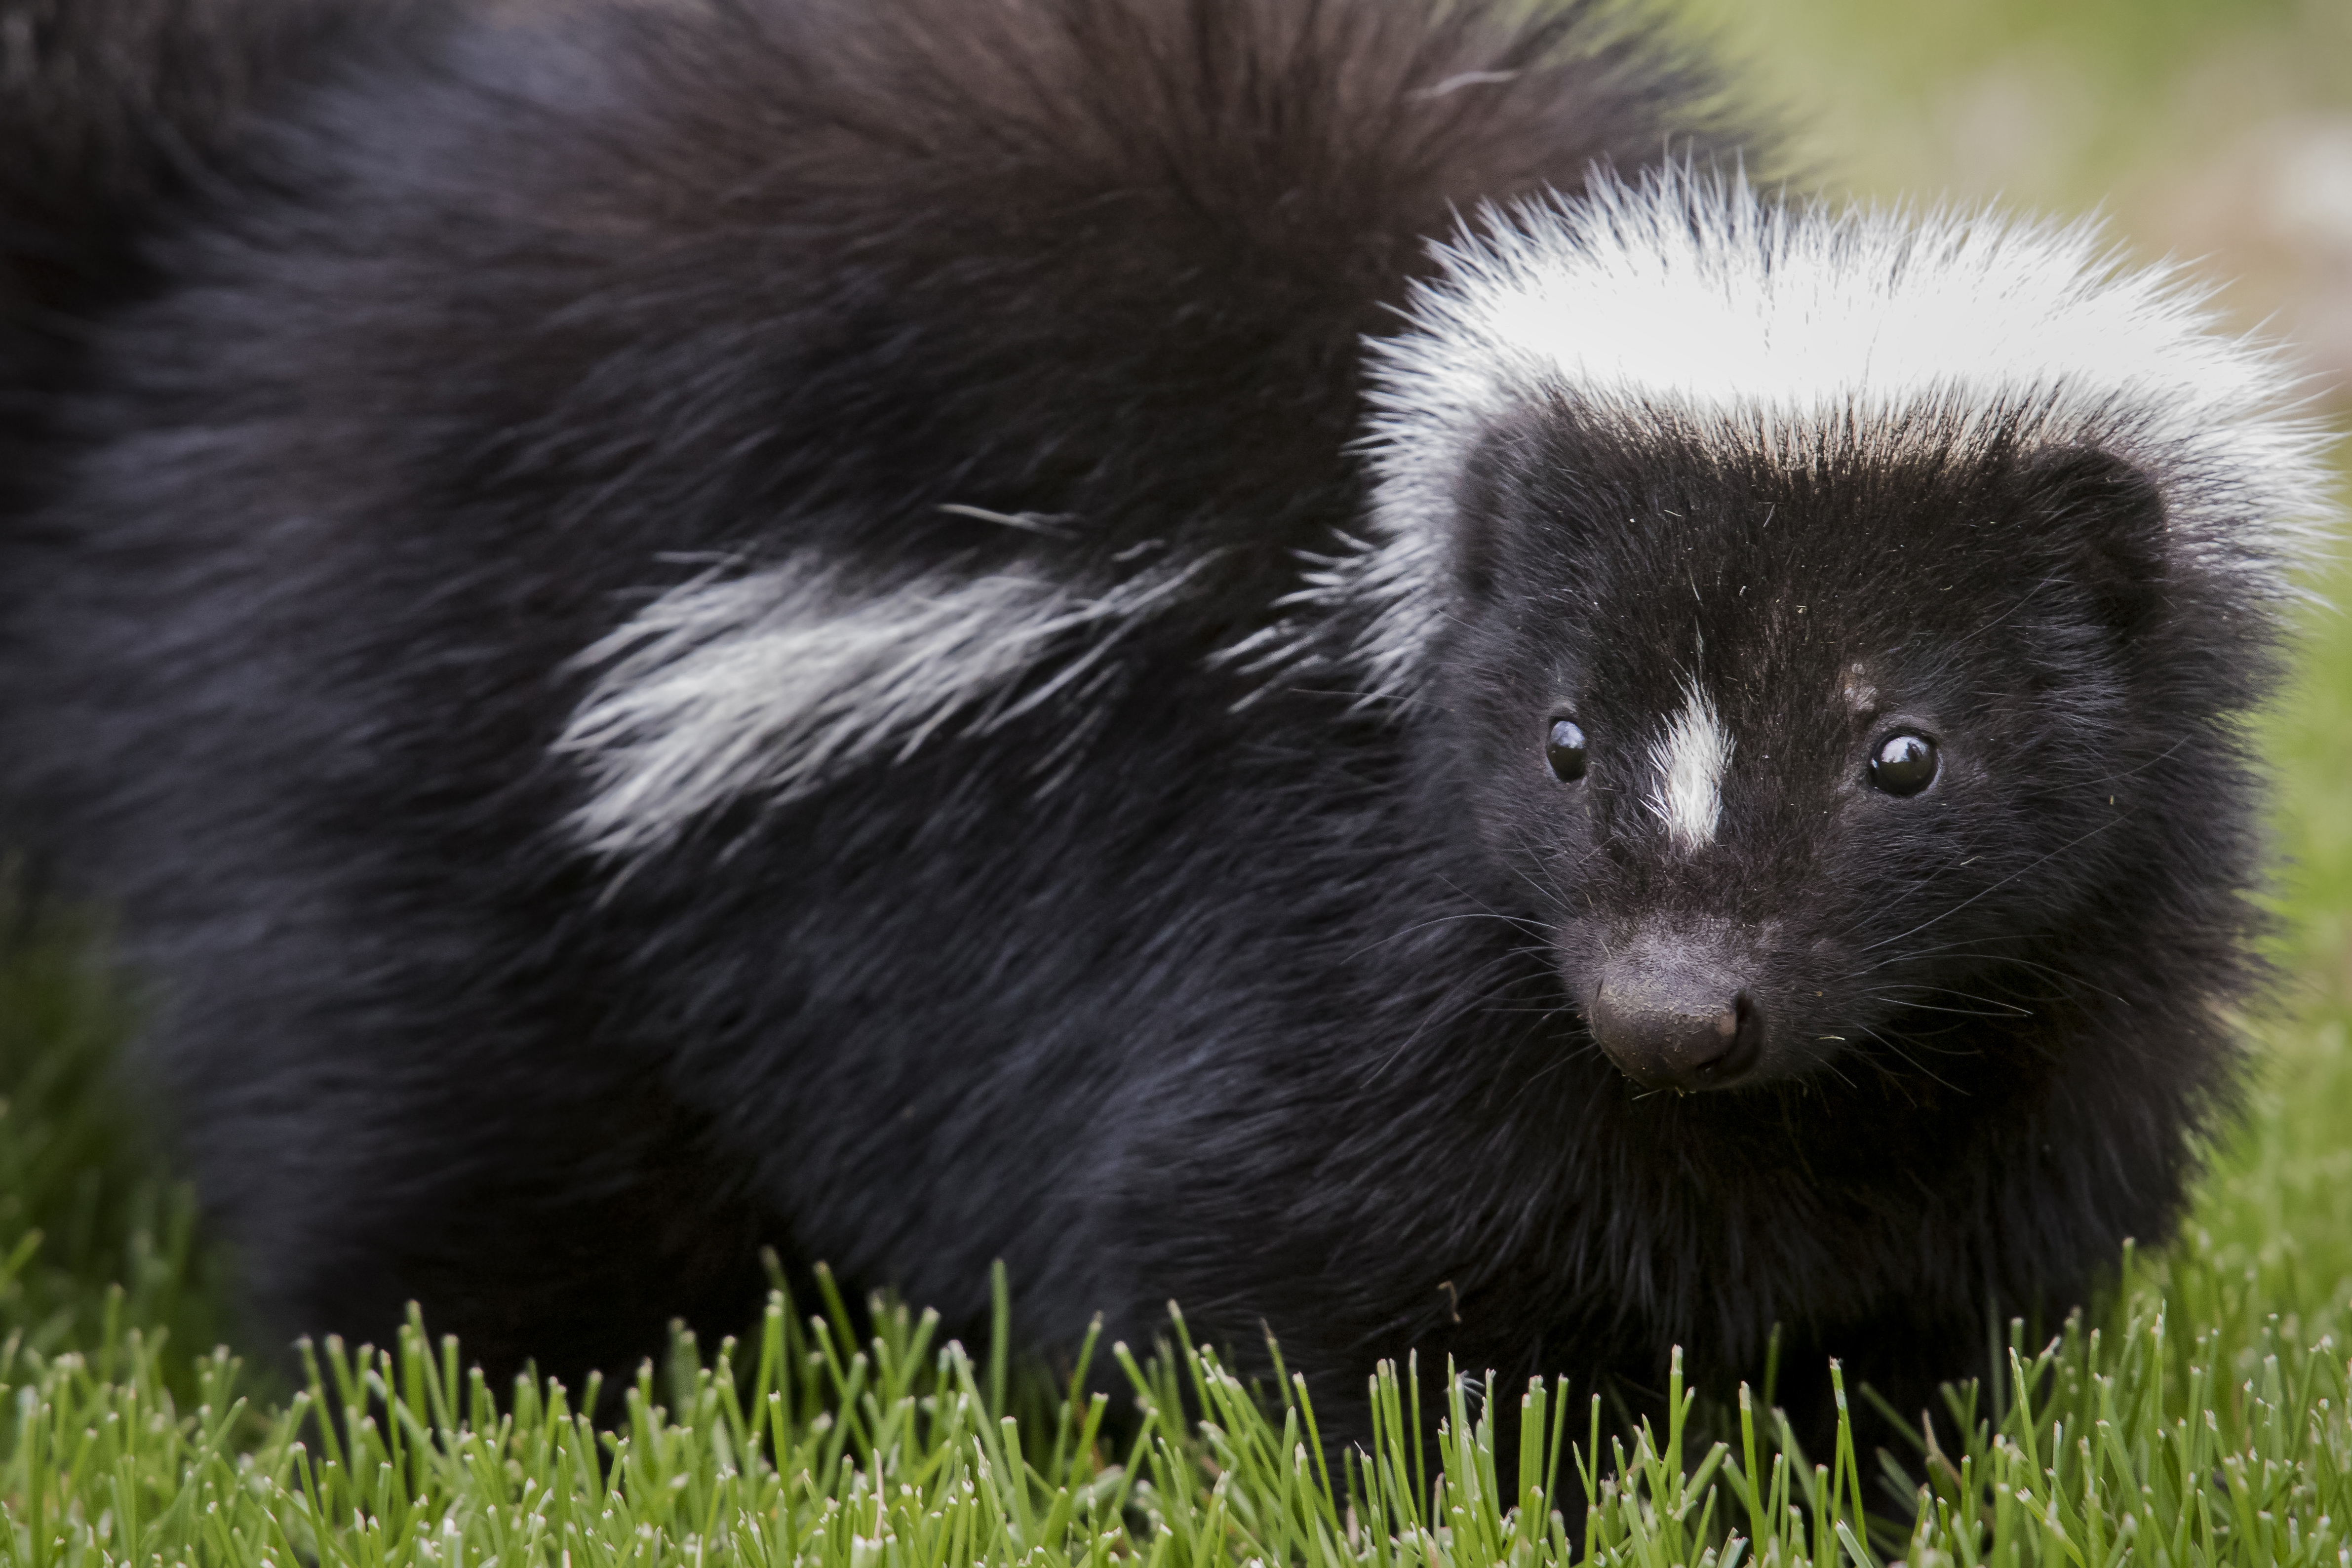 Photograph of a young skunk